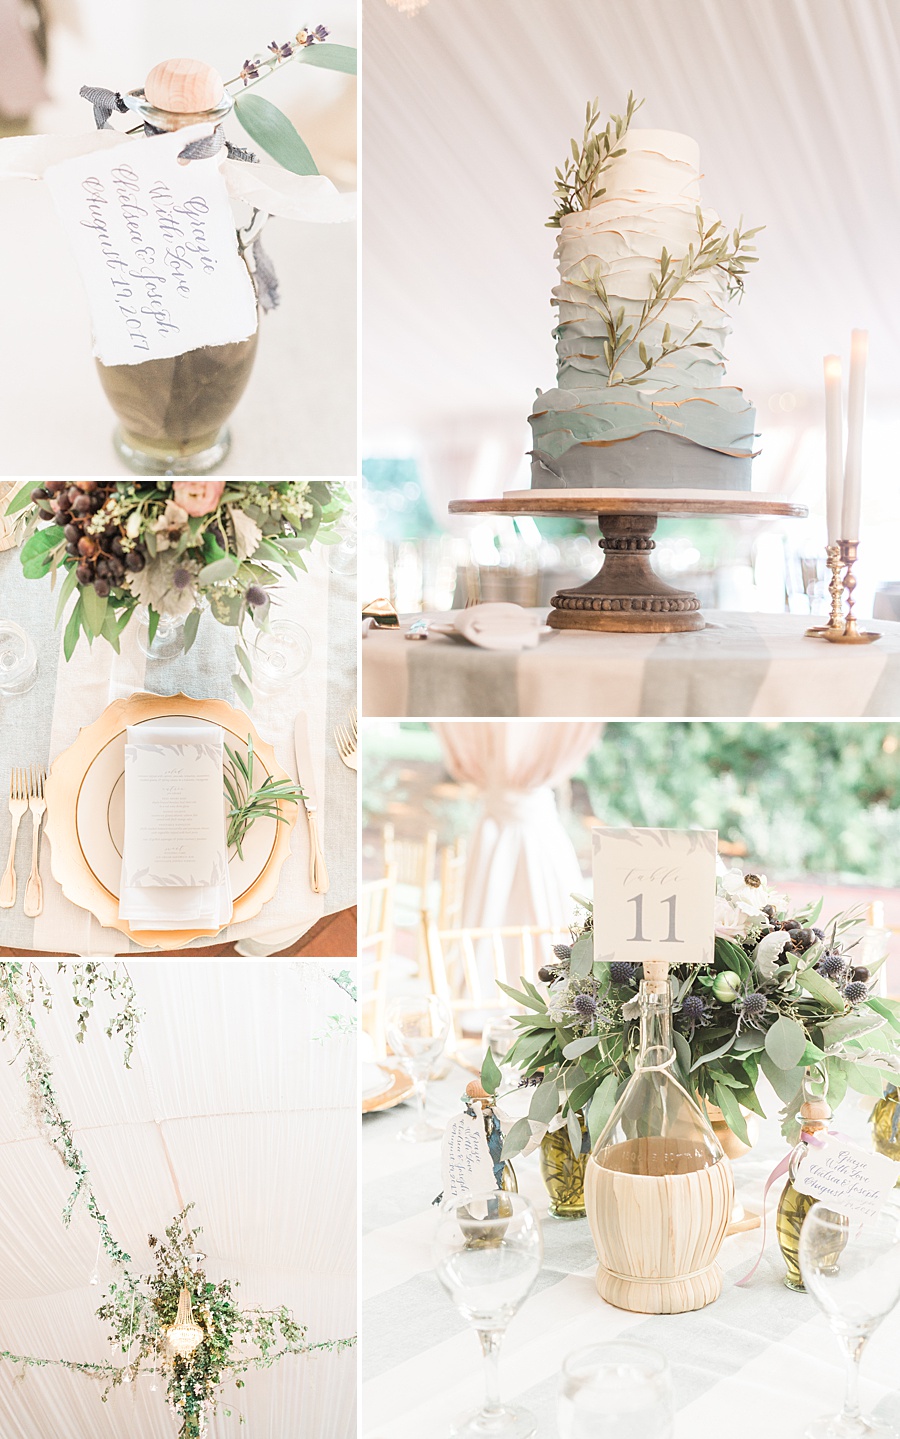 Catherine George Ombre Cake with Olive Leaves and Gold Accents - Romantic Tuscan Inspired Wedding with Ethereal color palette of pale blush, seafoam, pale  grays, dusty blues, champagne and gold by Manda Weaver Photography at Belmont Manor, Elle Ellinghaus Designs, White Glove Rentals, and  My Flower Box